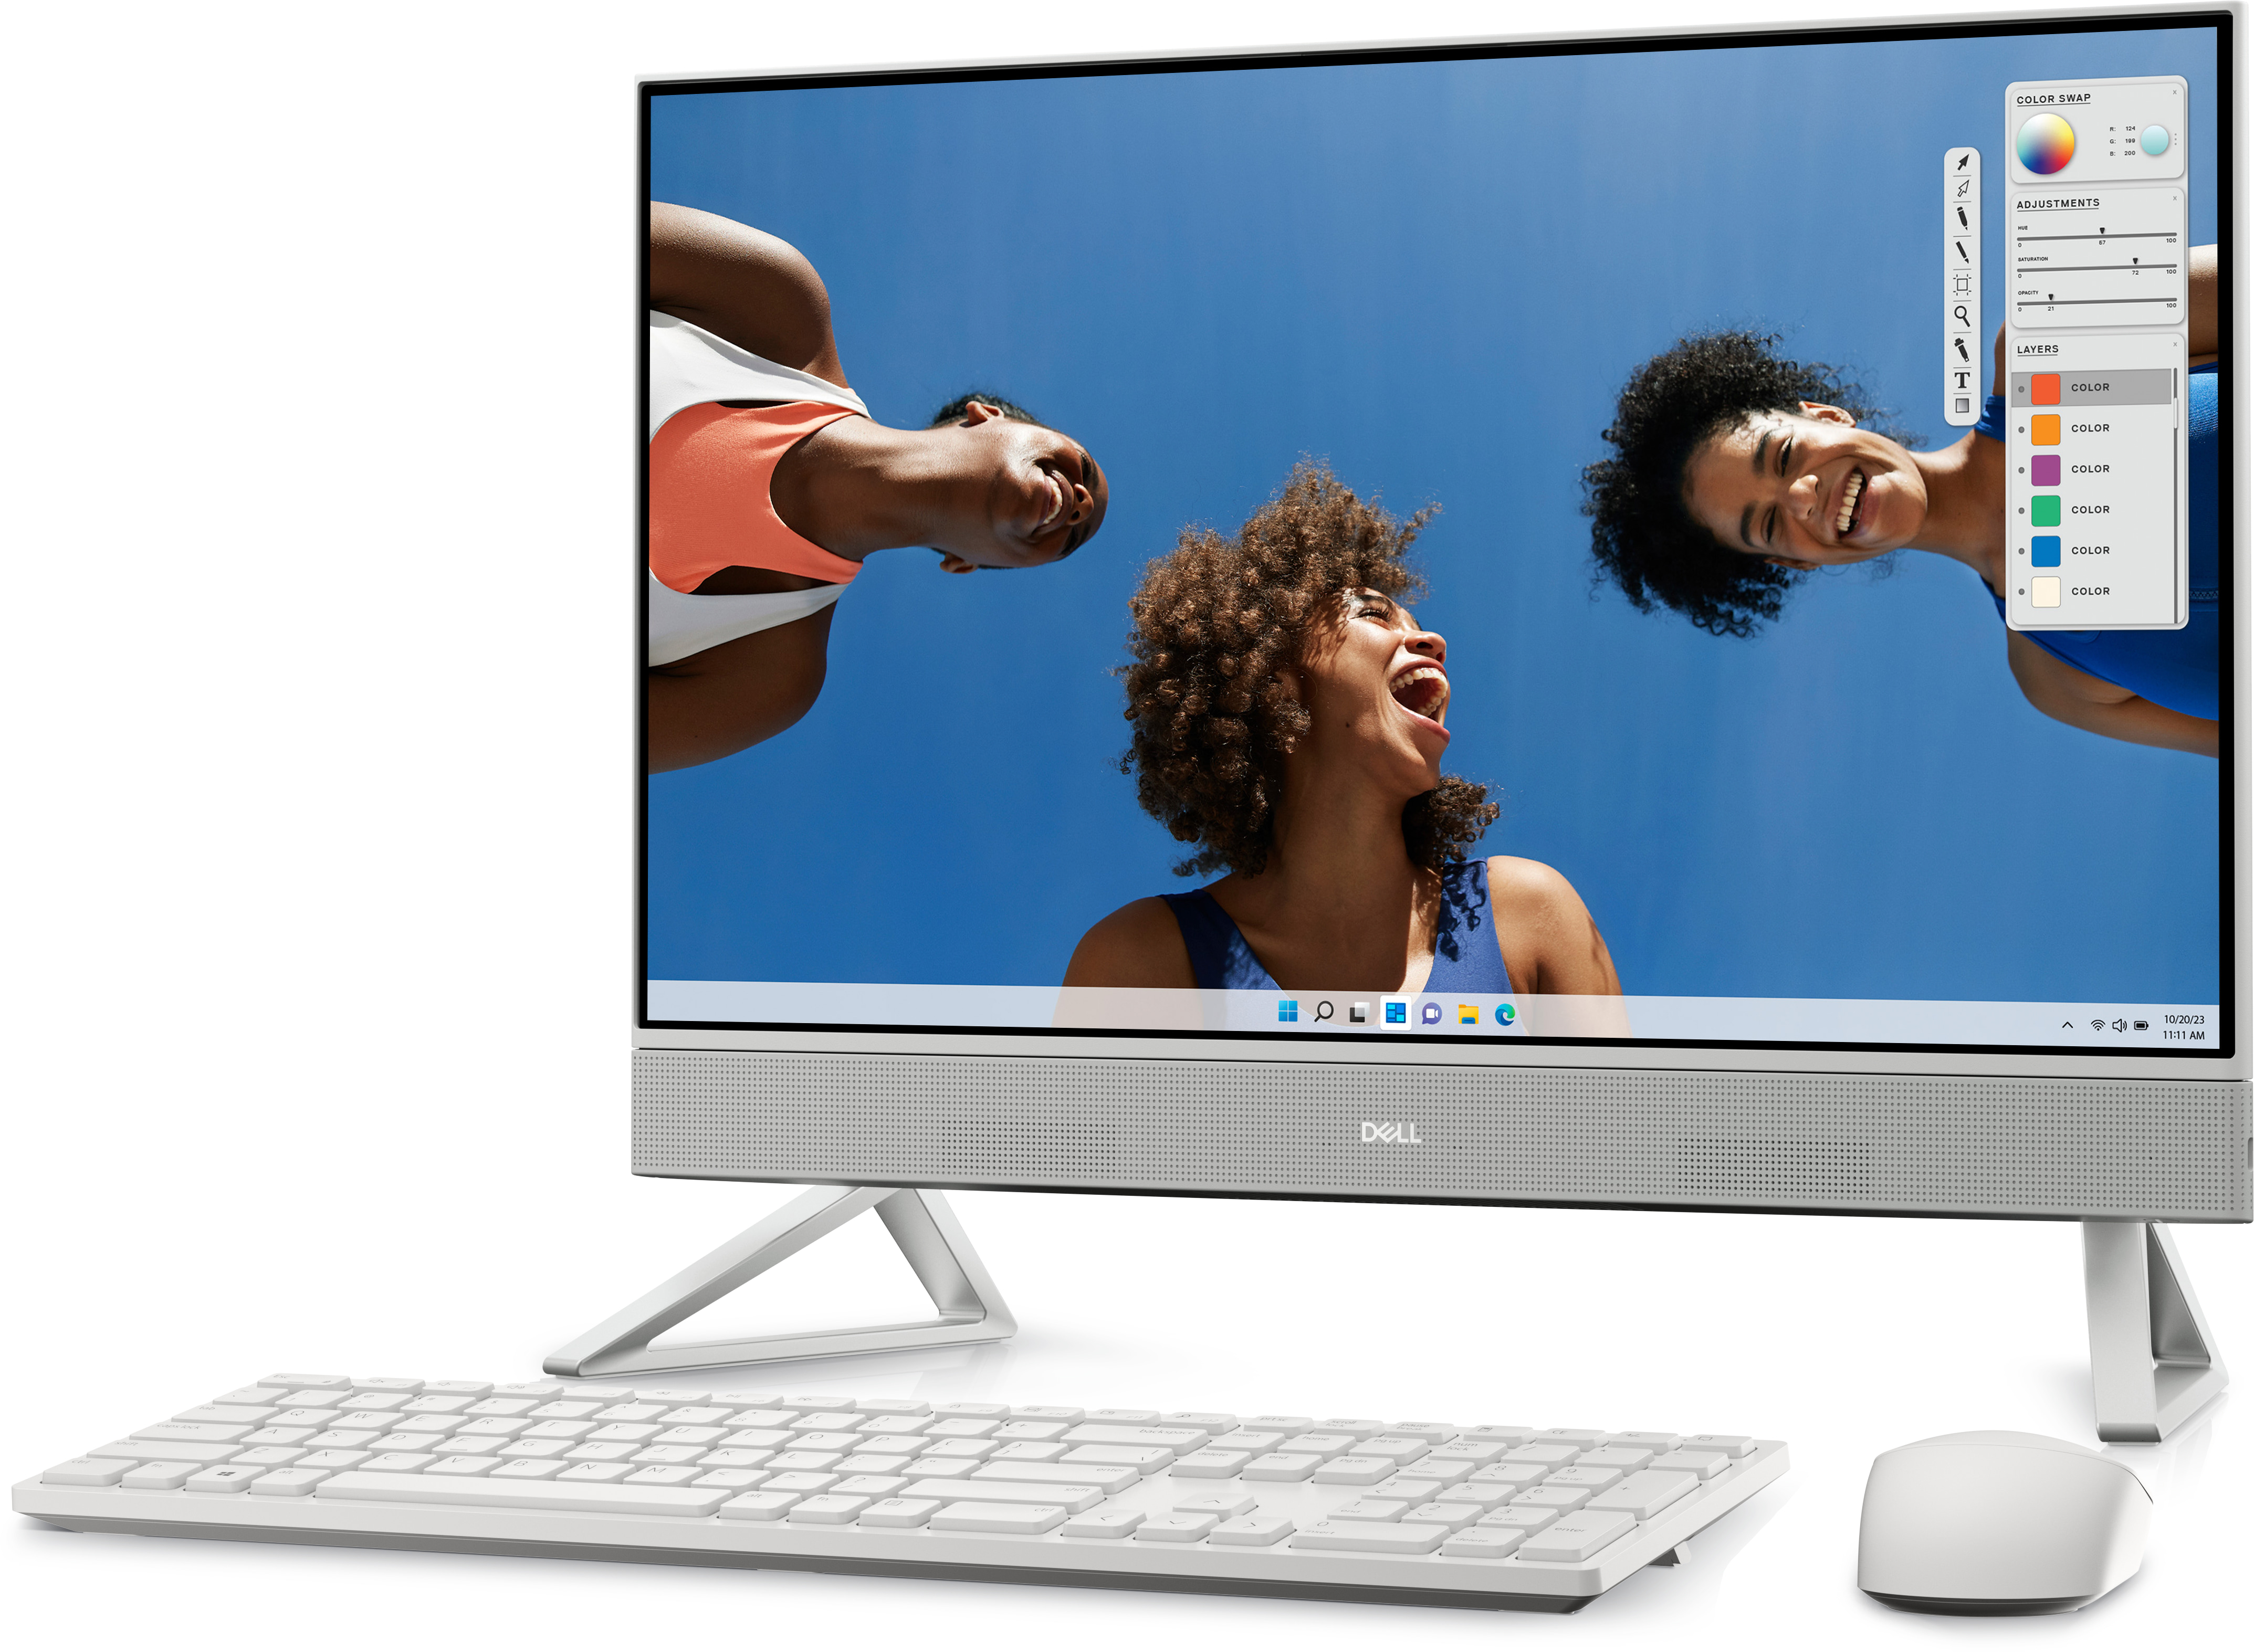 Dell Inspiron 24 All-In-One computer with Windows 11 | Dell Canada